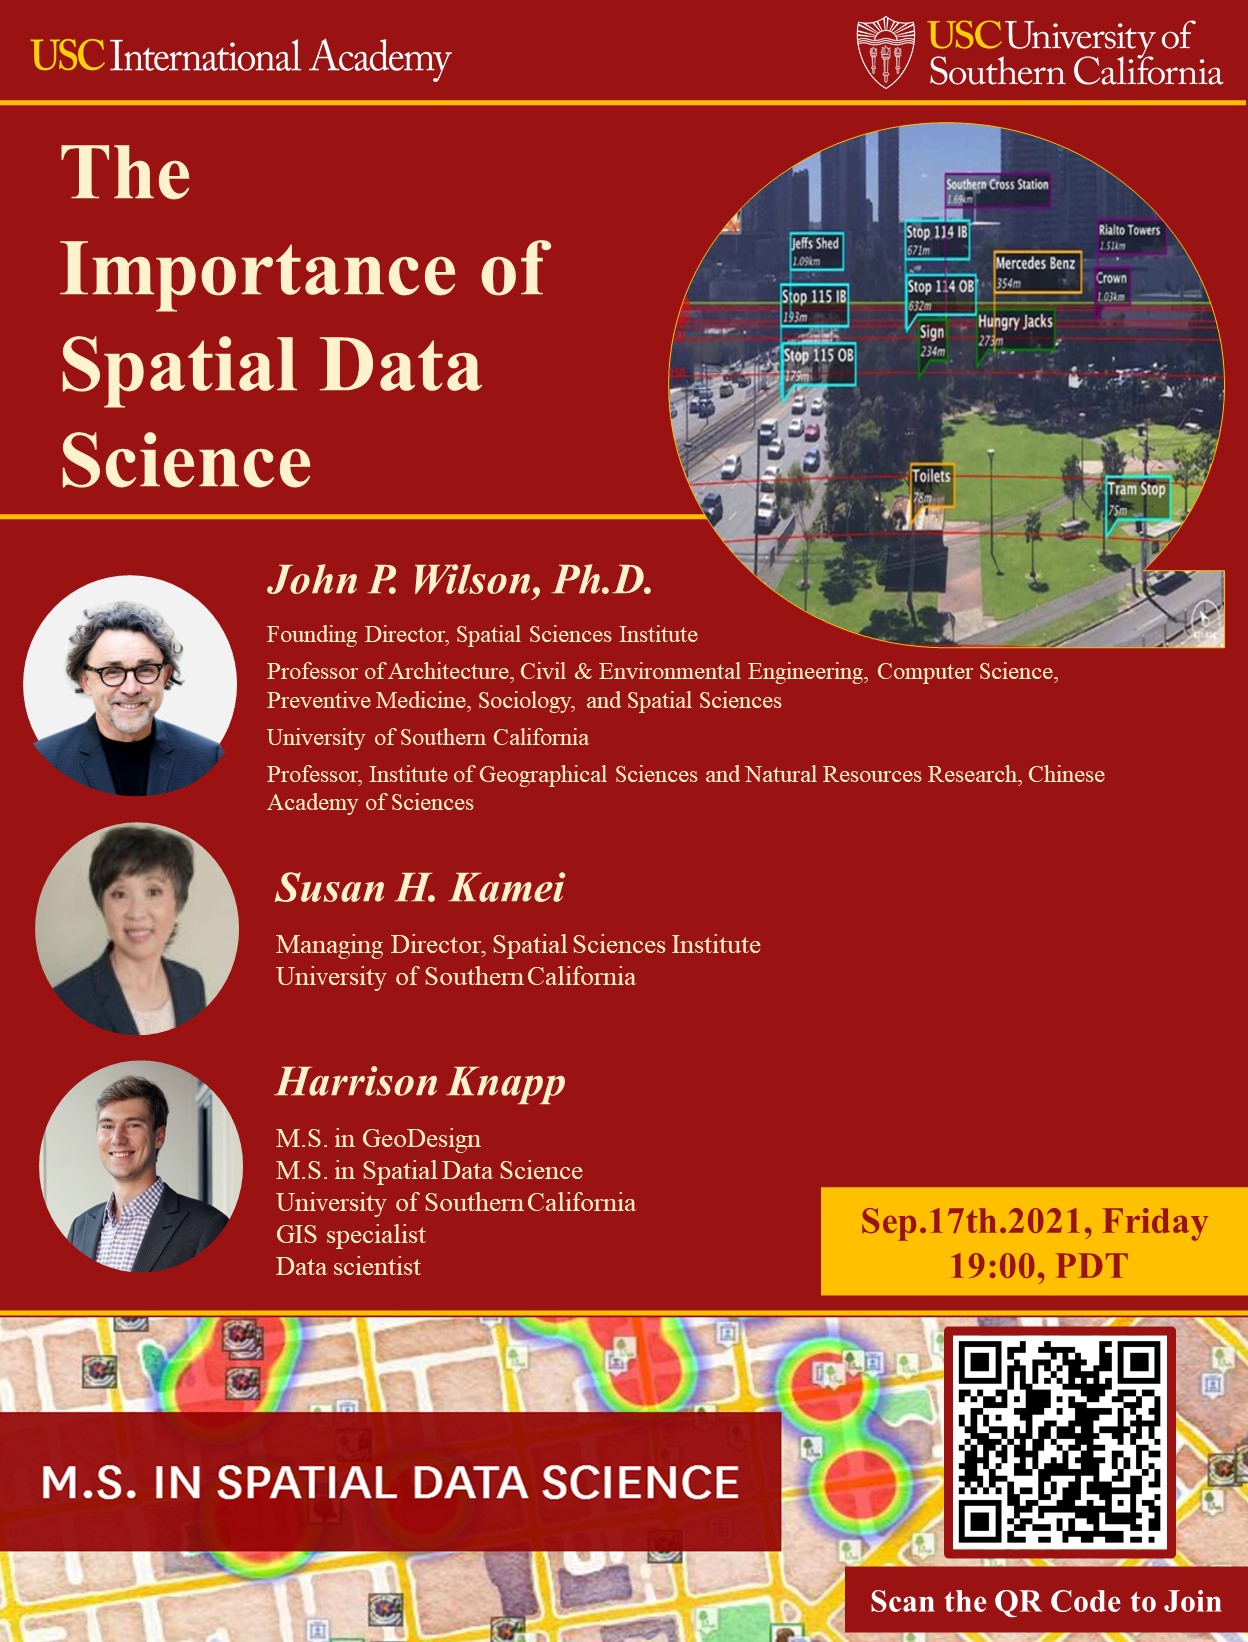 The Importance of Spatial Data Science